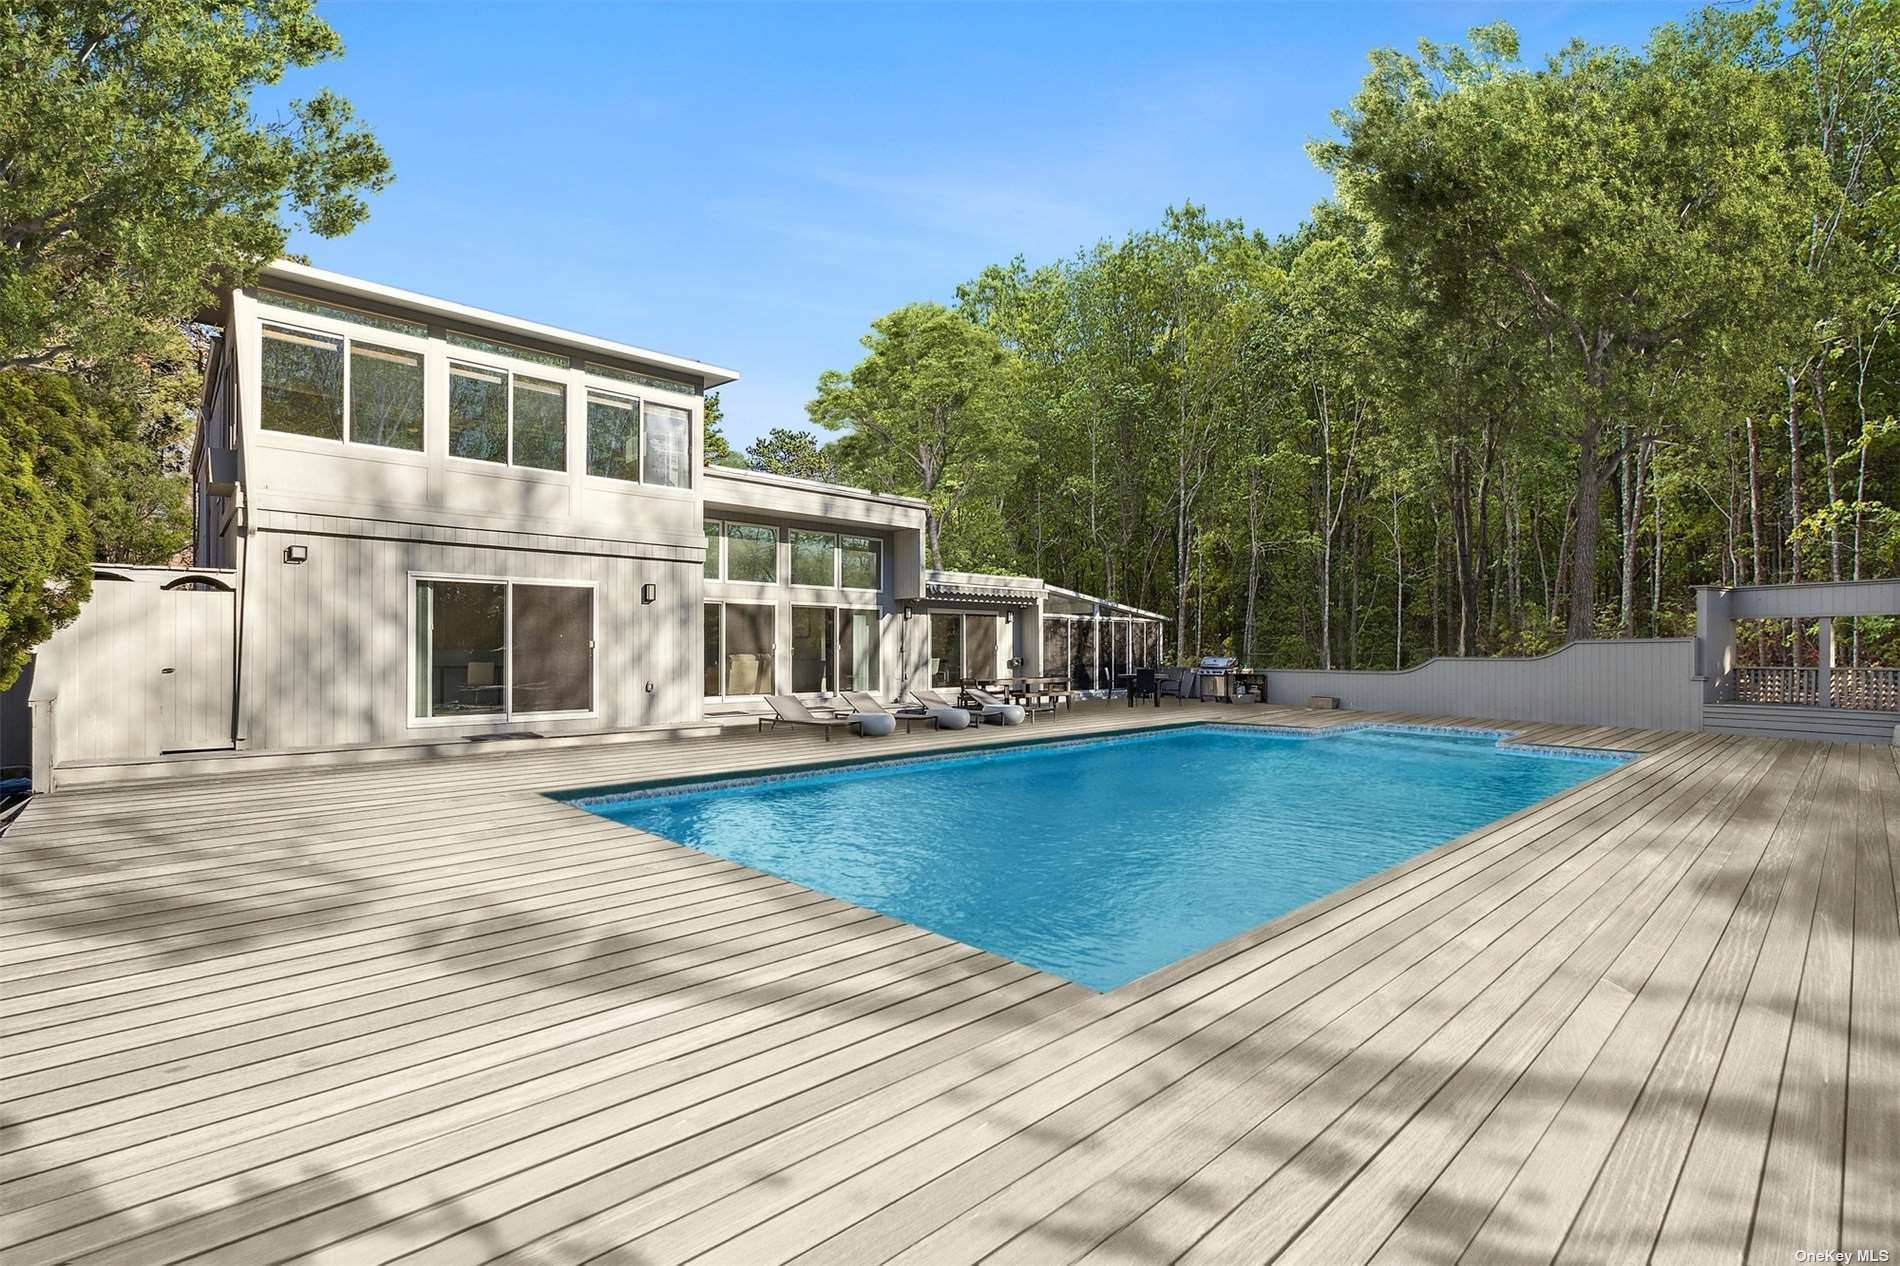 Located within the sought after neighborhood of East Quogue in the Hamptons, the picturesque estate at 32 Fox Hollow Drive stands as an epitome of luxury living.